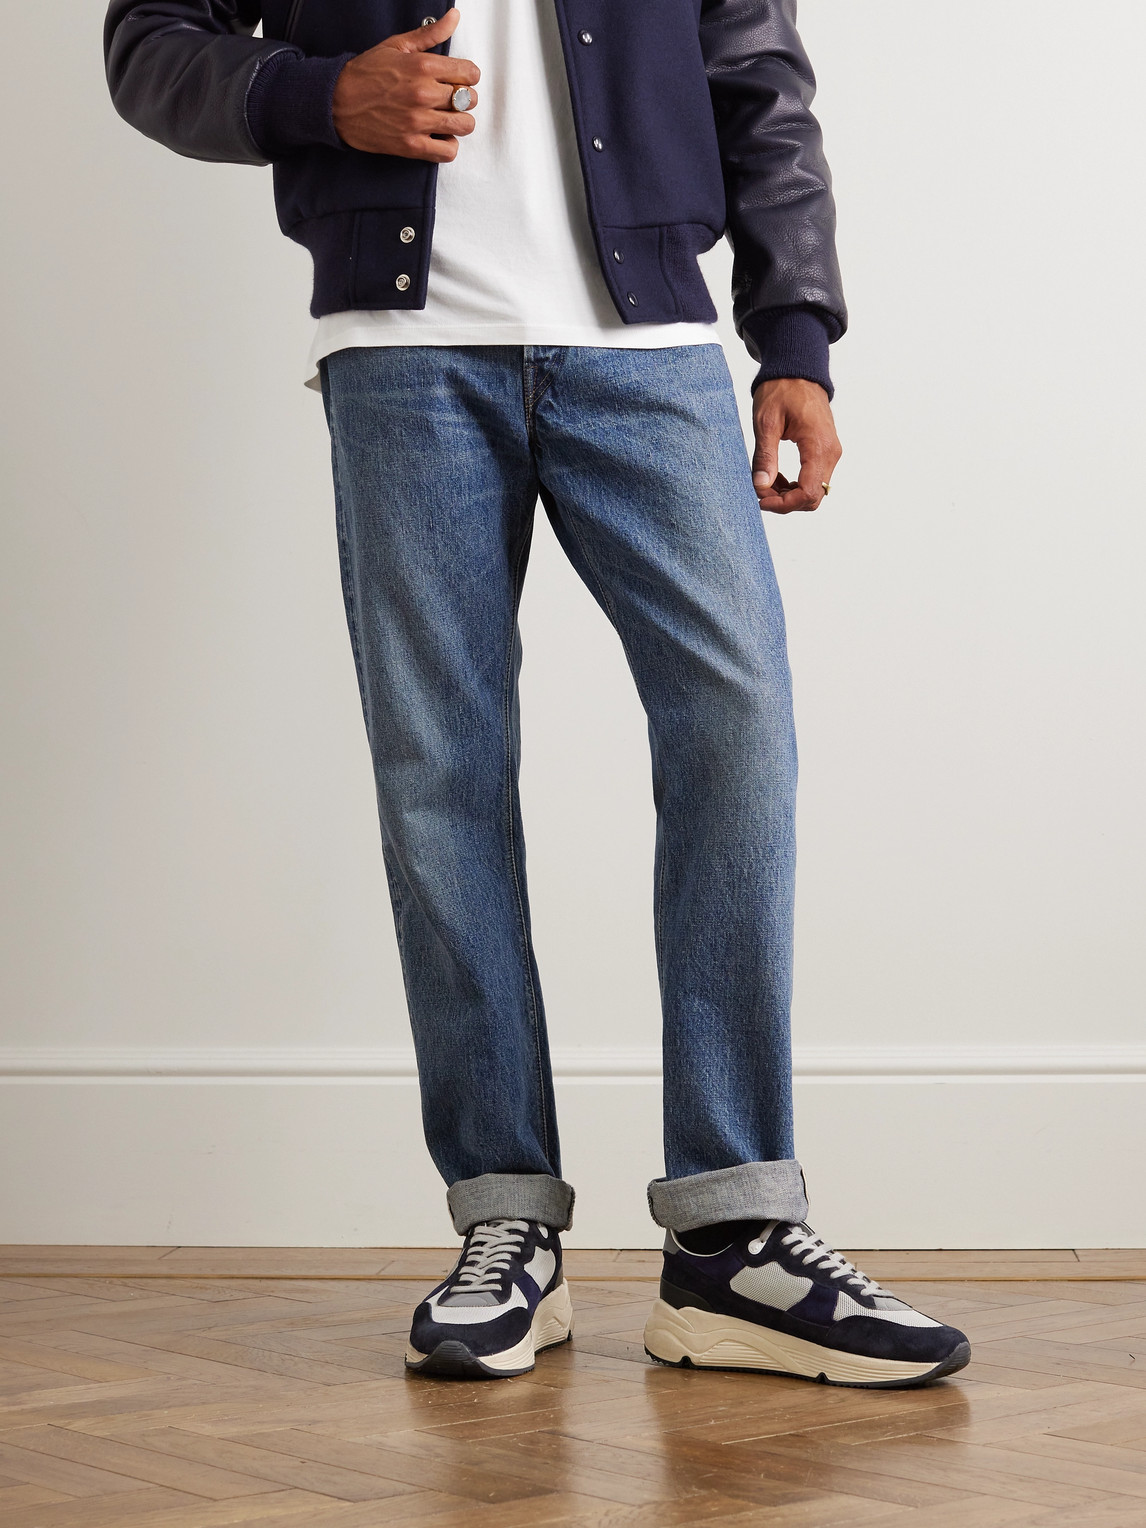 Shop Golden Goose Leather-trimmed Mesh And Suede Sneakers In Blue